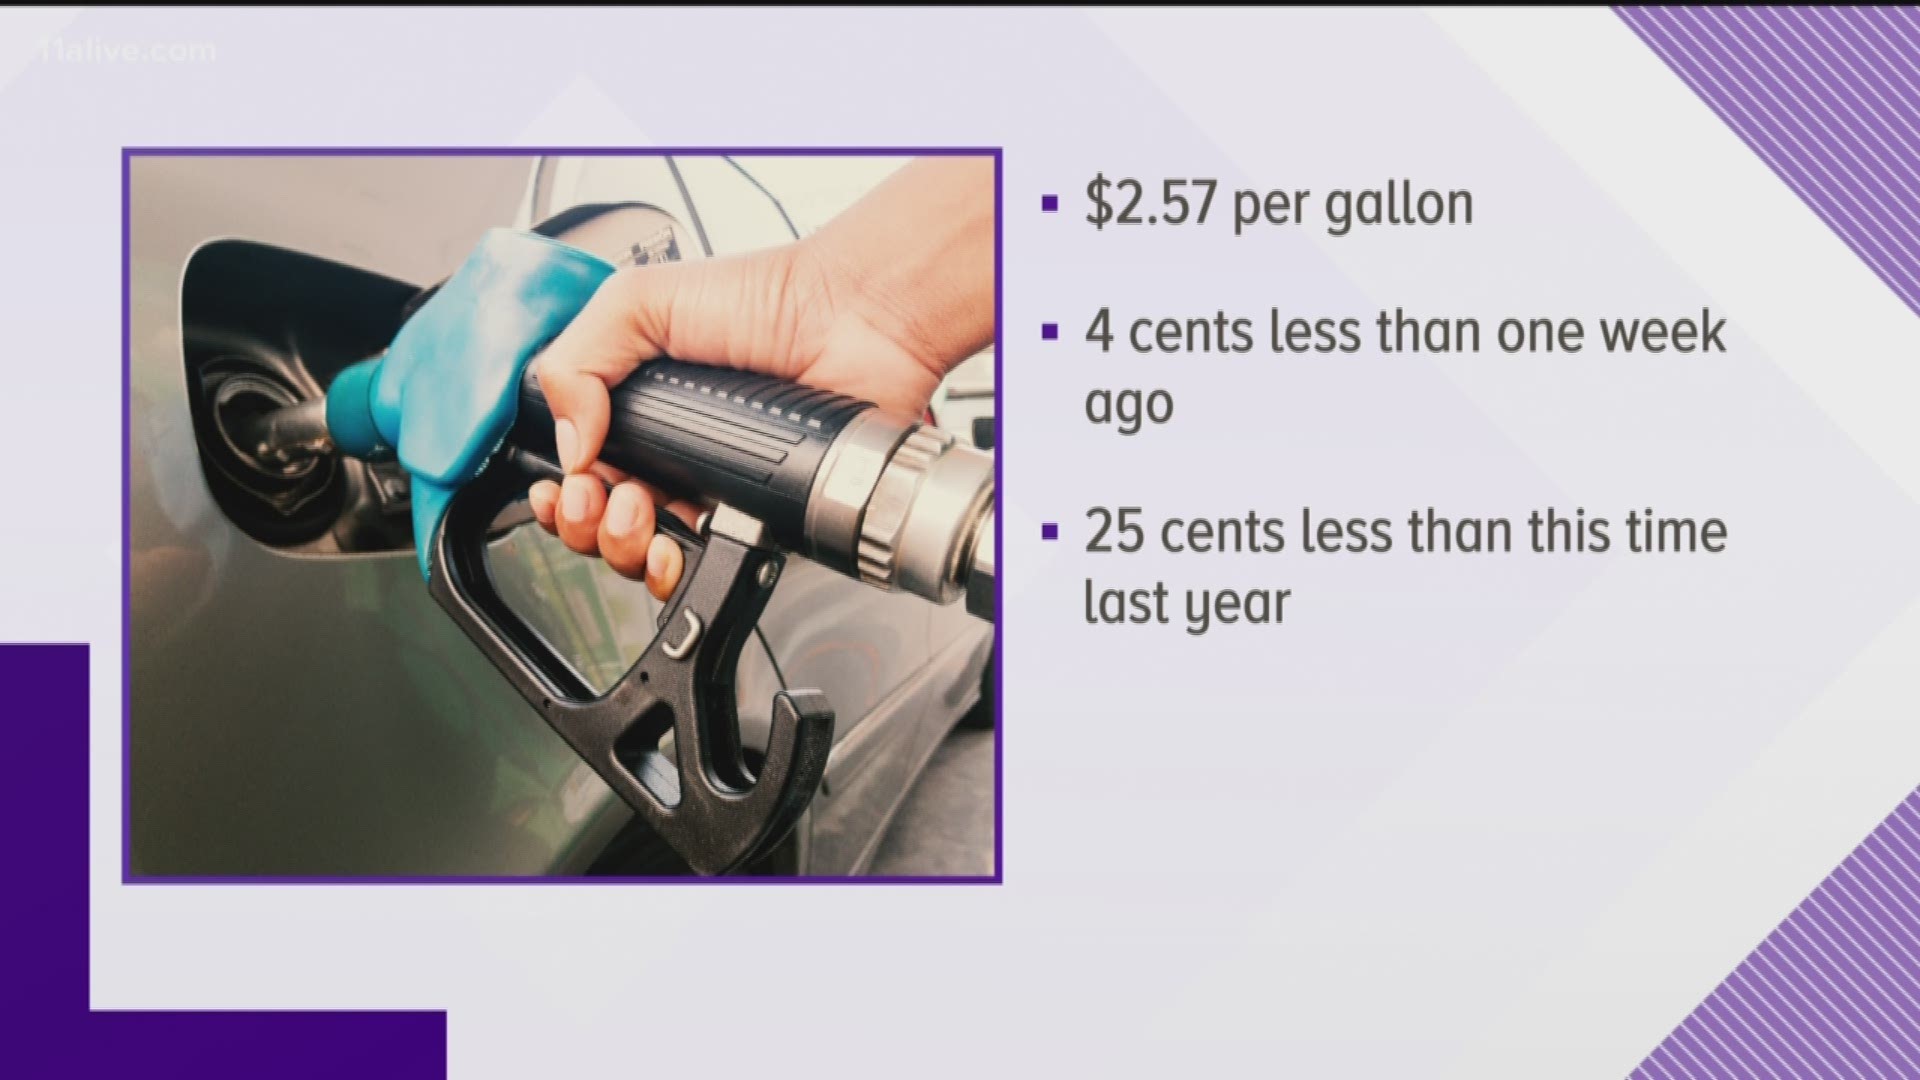 Prices have fallen an average of 4 cents a gallon over the past week.